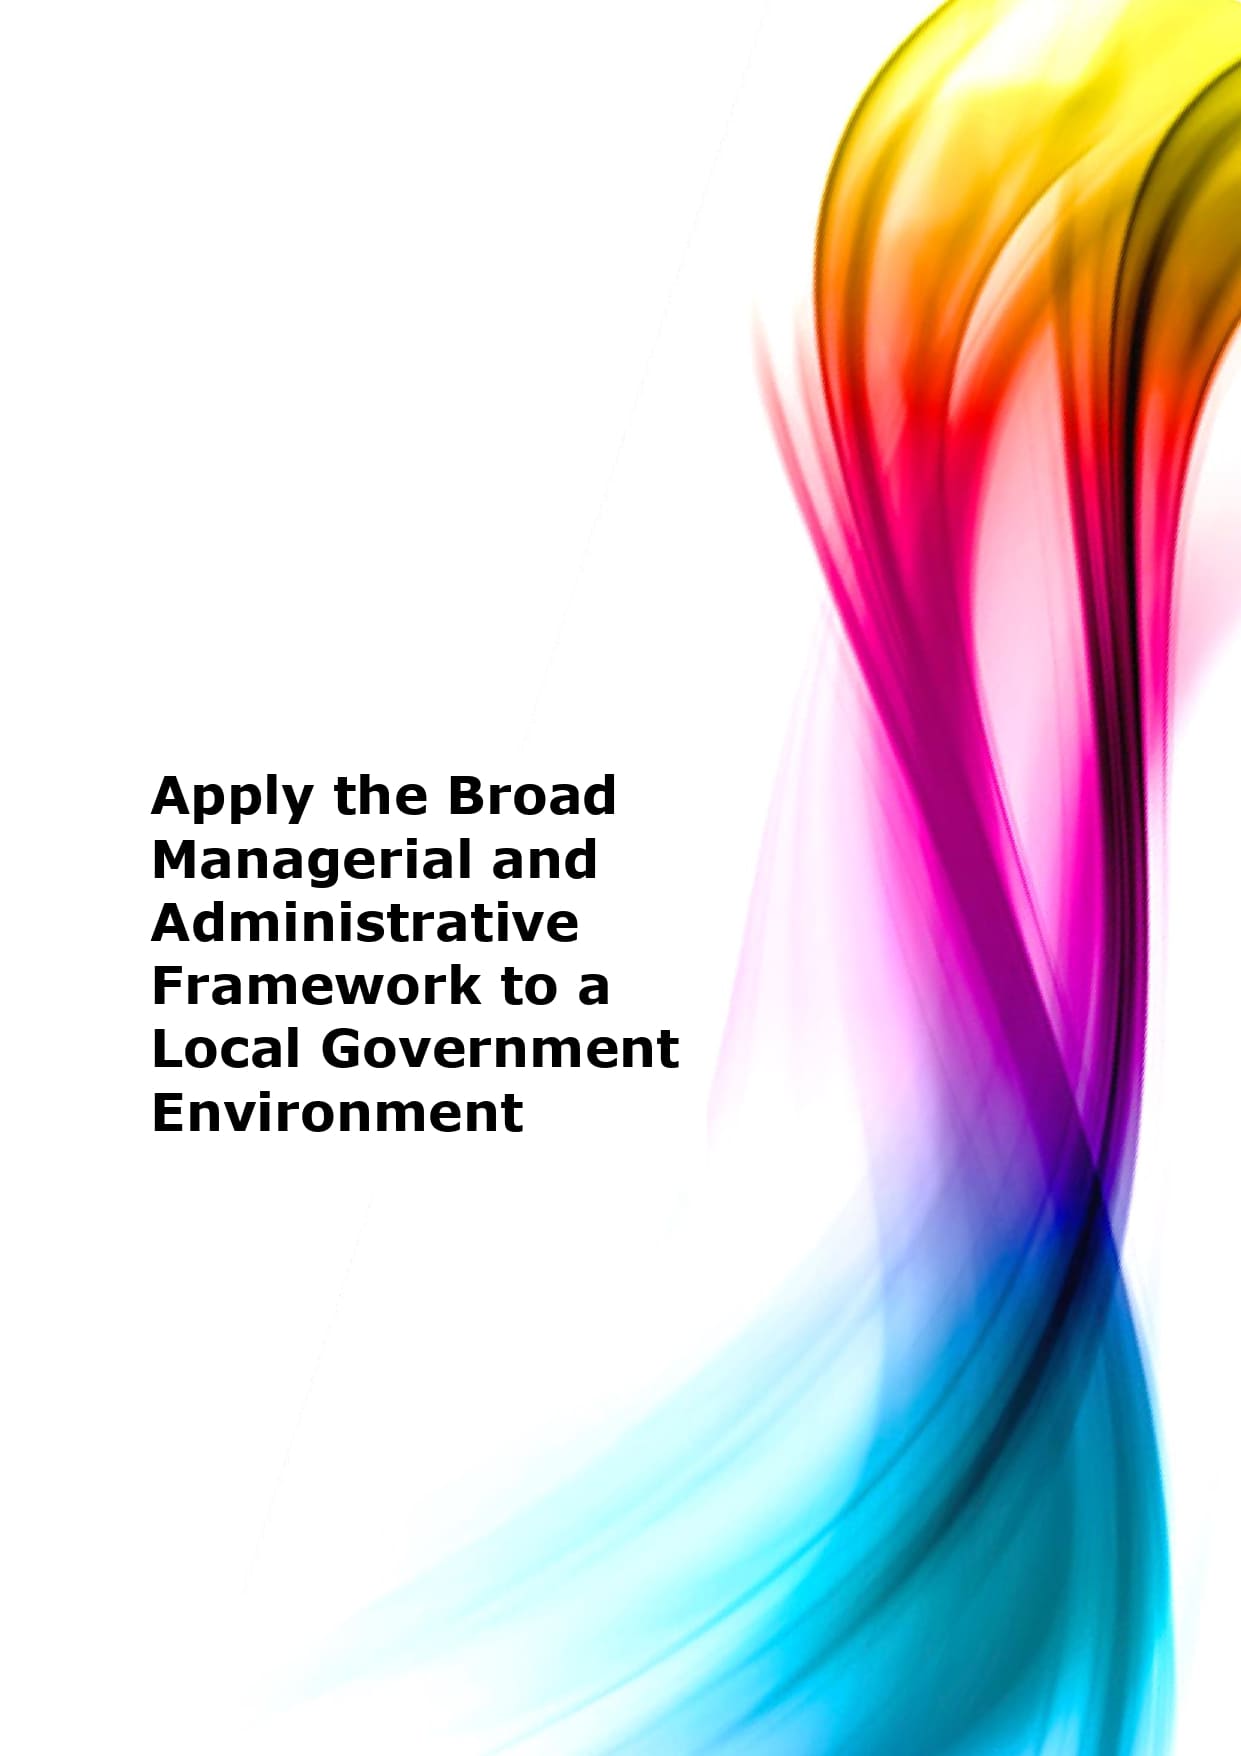 Apply the broad managerial and administrative framework to a local government environment